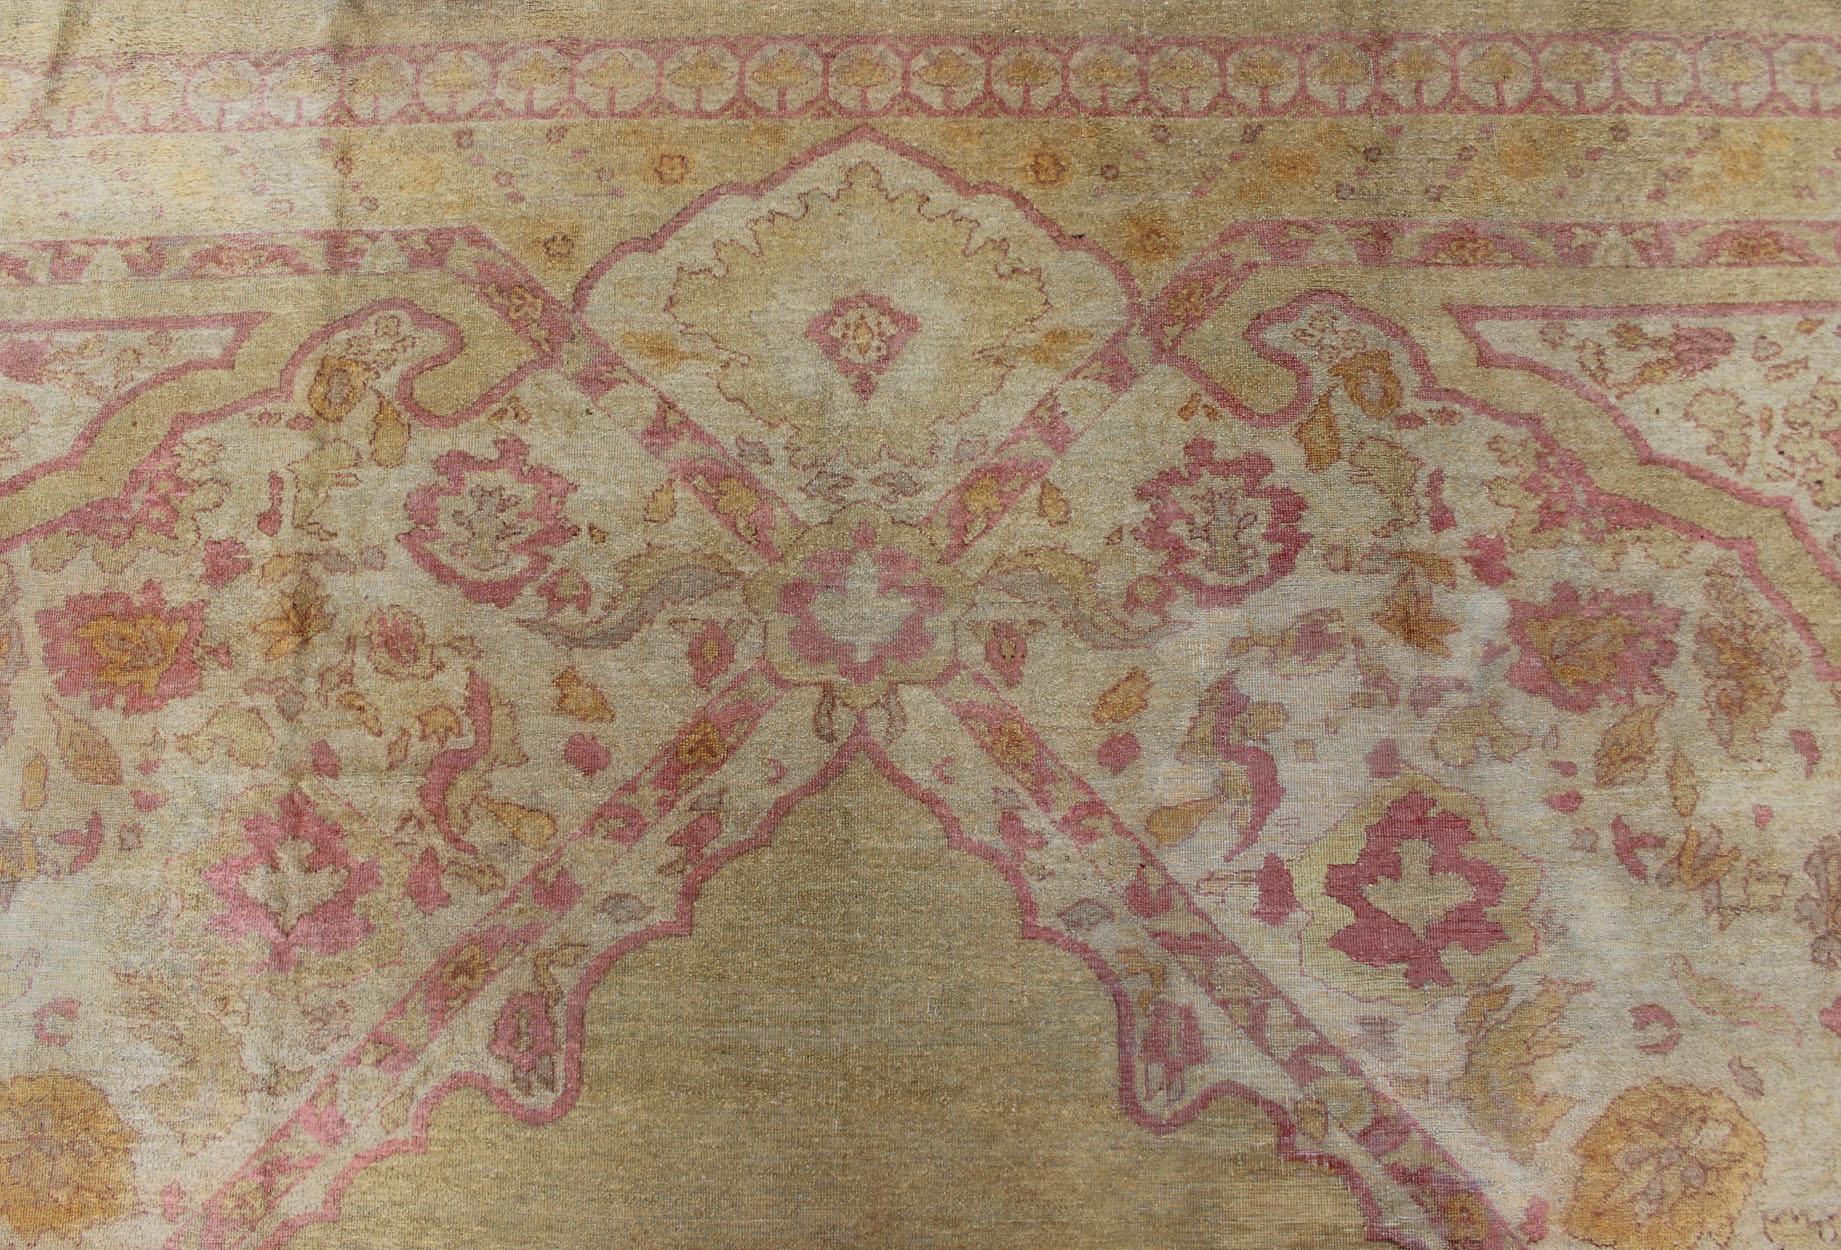 Antique Amritsar Rug With Medallion Design in Acidic-Yellow Green, Pink, Ivory For Sale 8